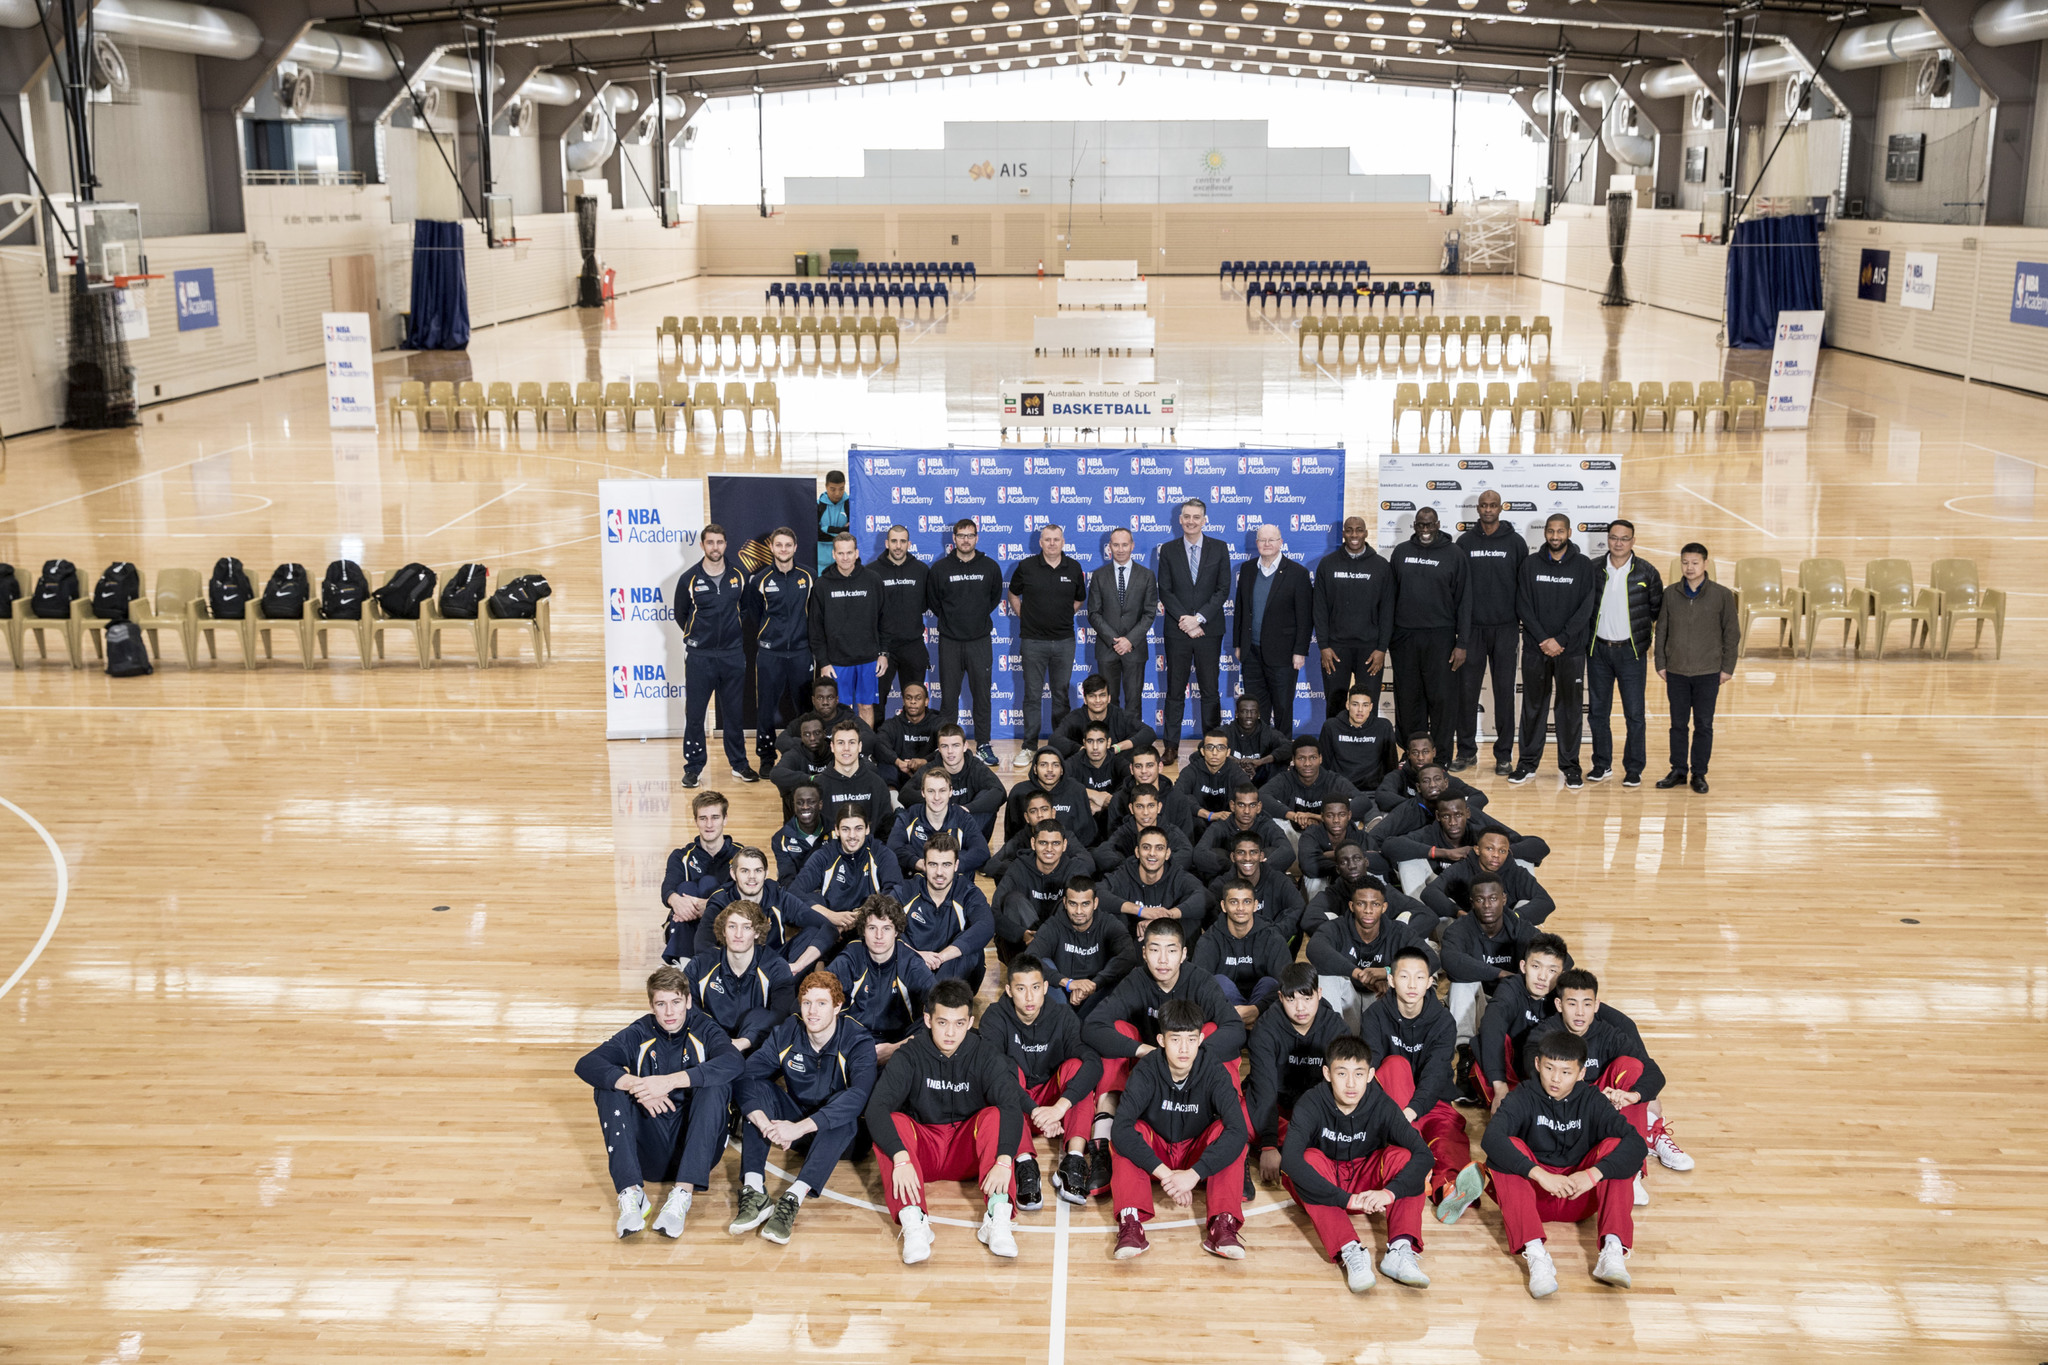 3,000 students to watch live NBA Game in India under Reliance foundation